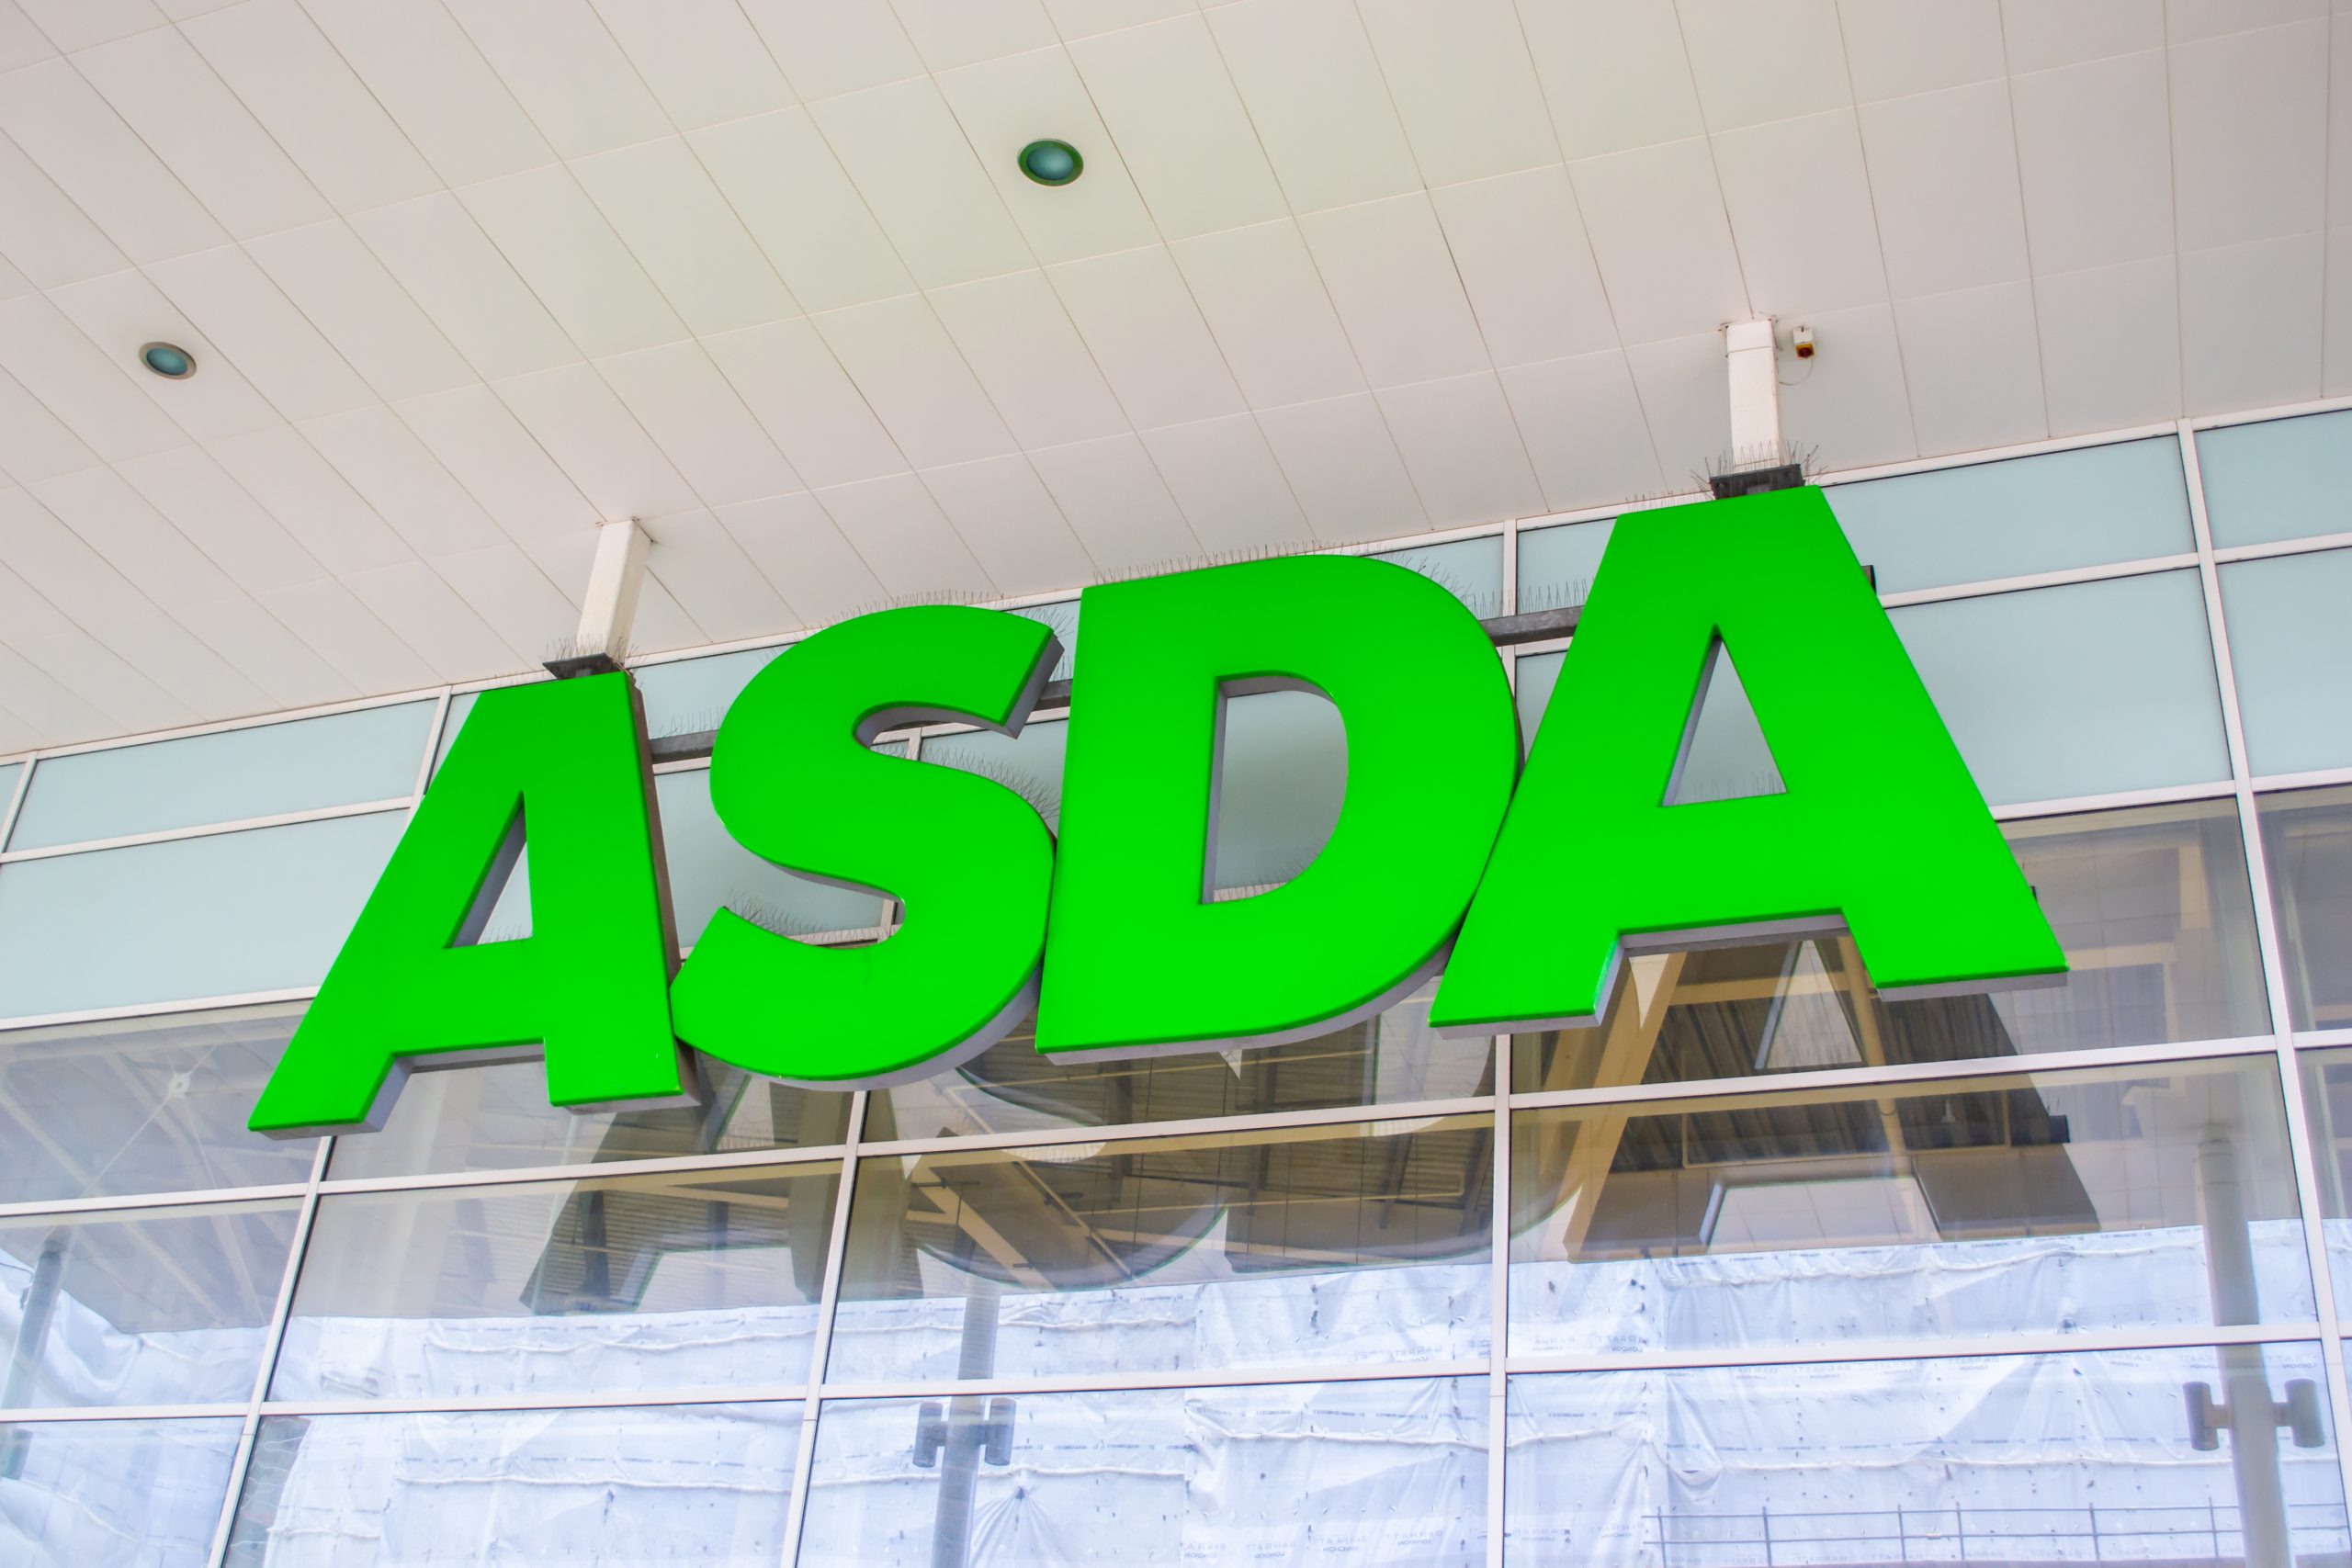 Asda plans to expand its convenience sector with 300 new stores